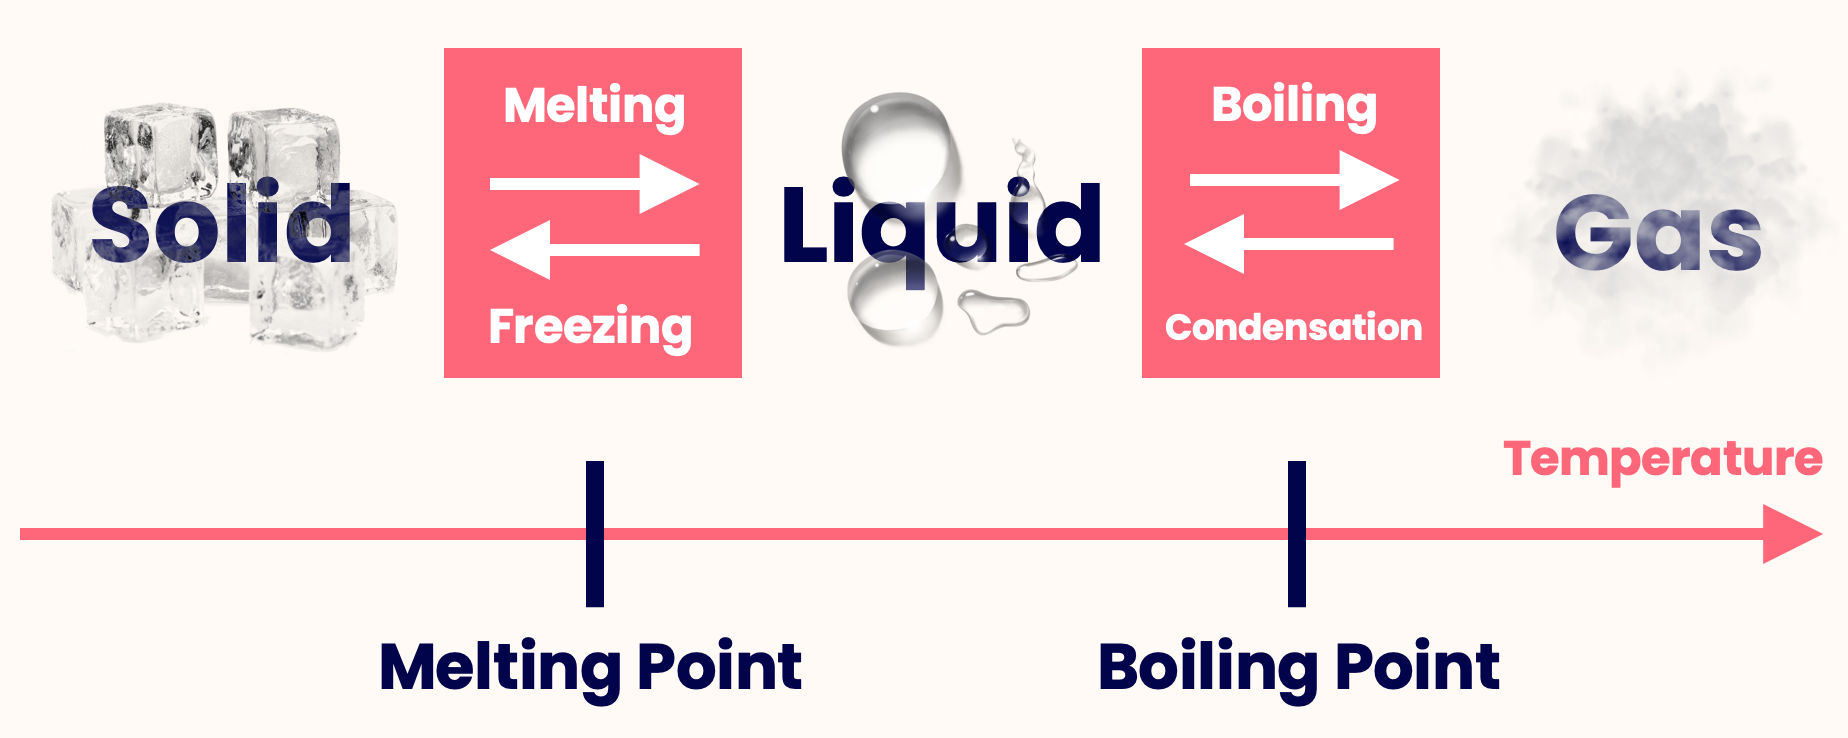 A graph of solid/liquid/gas against temperature. The boiling point (liquid to gas) is always at a higher temperature than the melting point (solid to liquid).